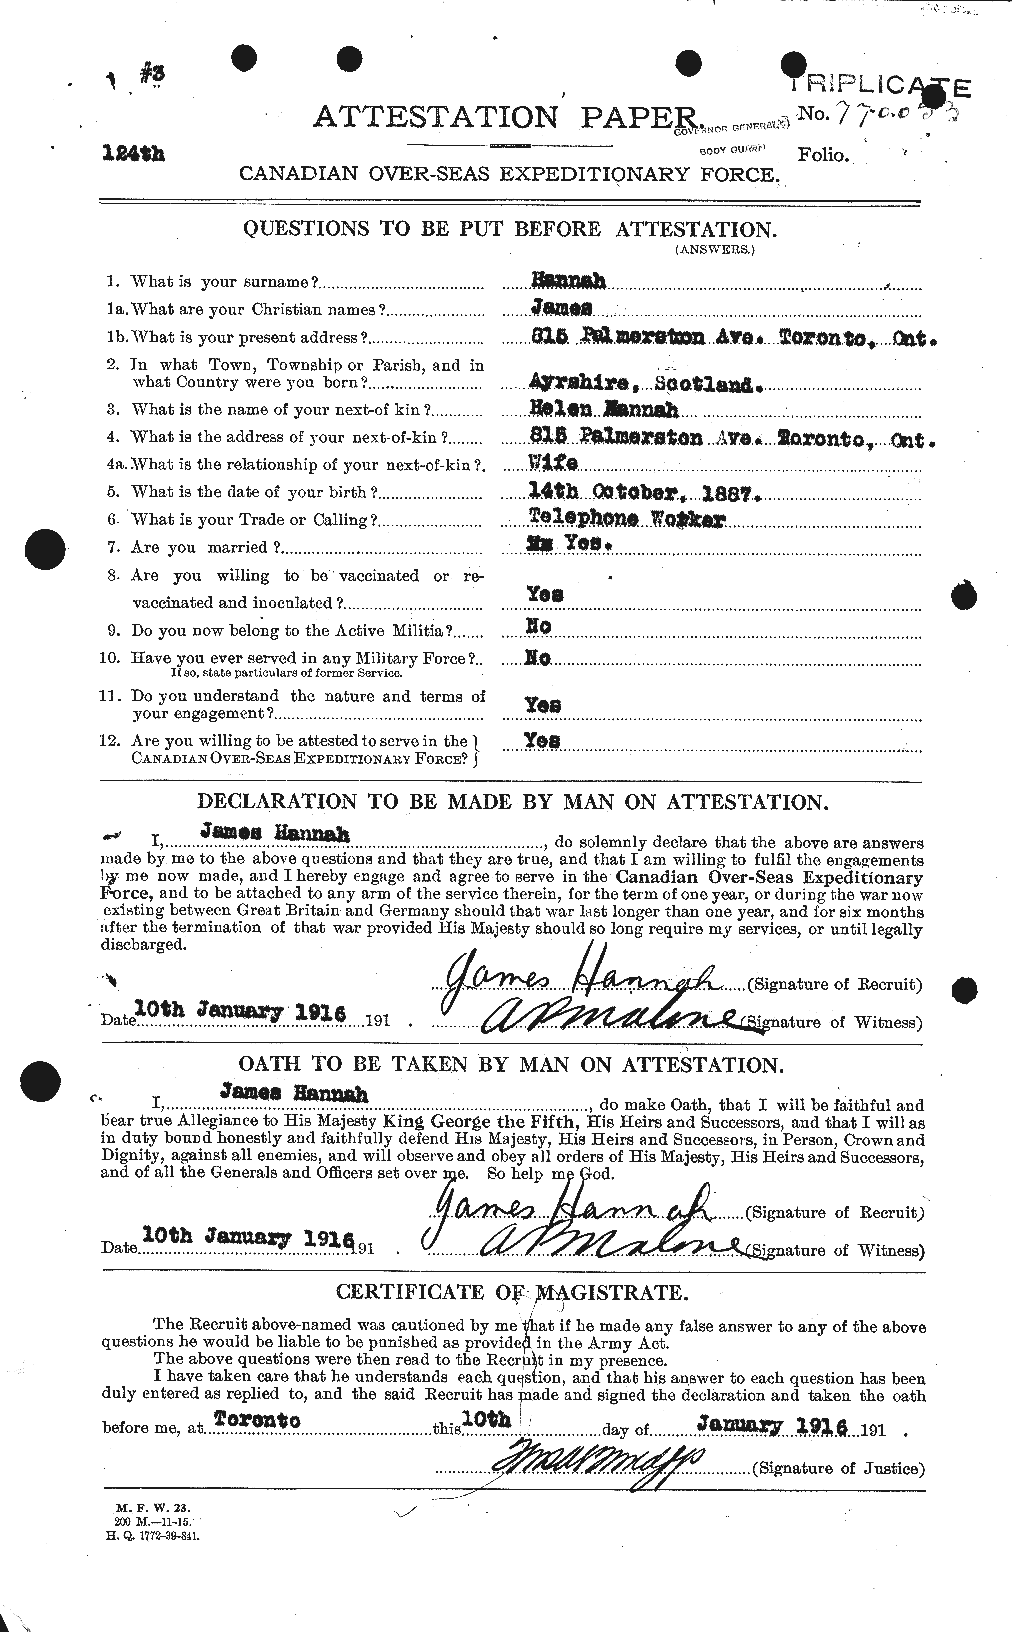 Personnel Records of the First World War - CEF 374730a